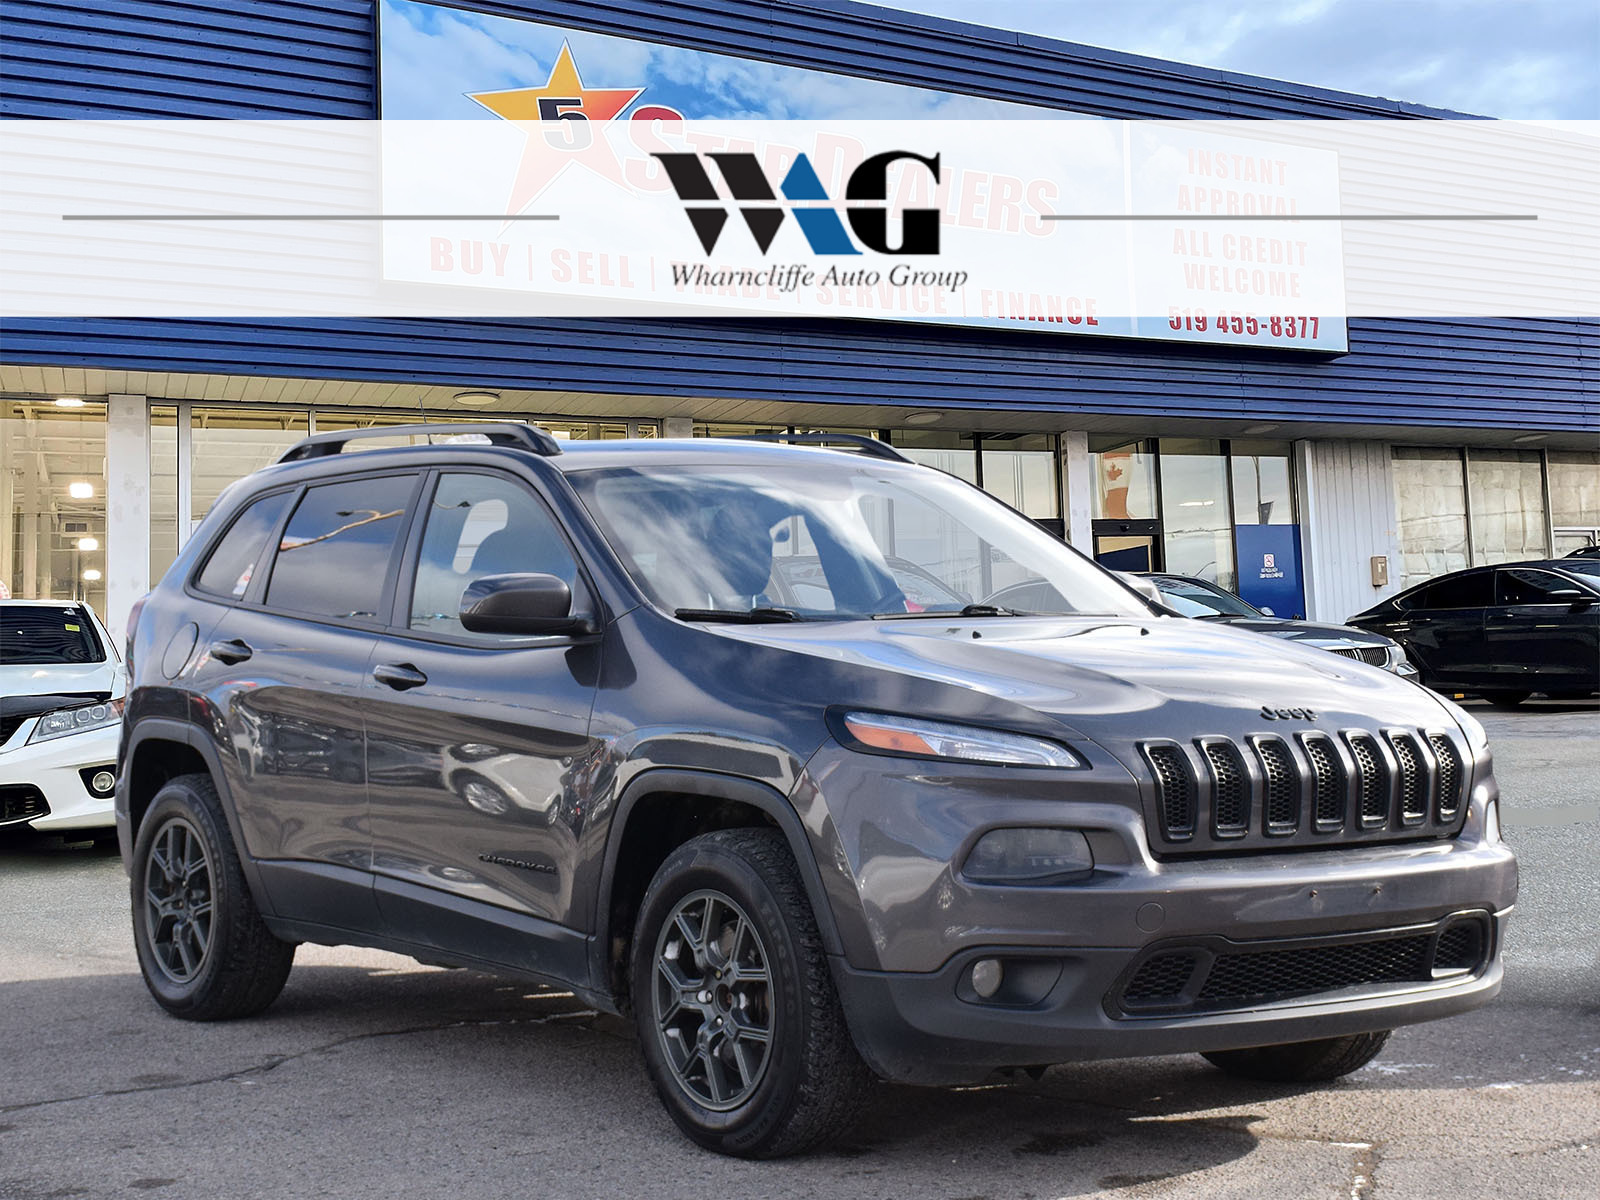 2014 Jeep Cherokee GREAT CONDITION! MUST SEE! WE FINANCE ALL CREDIT!